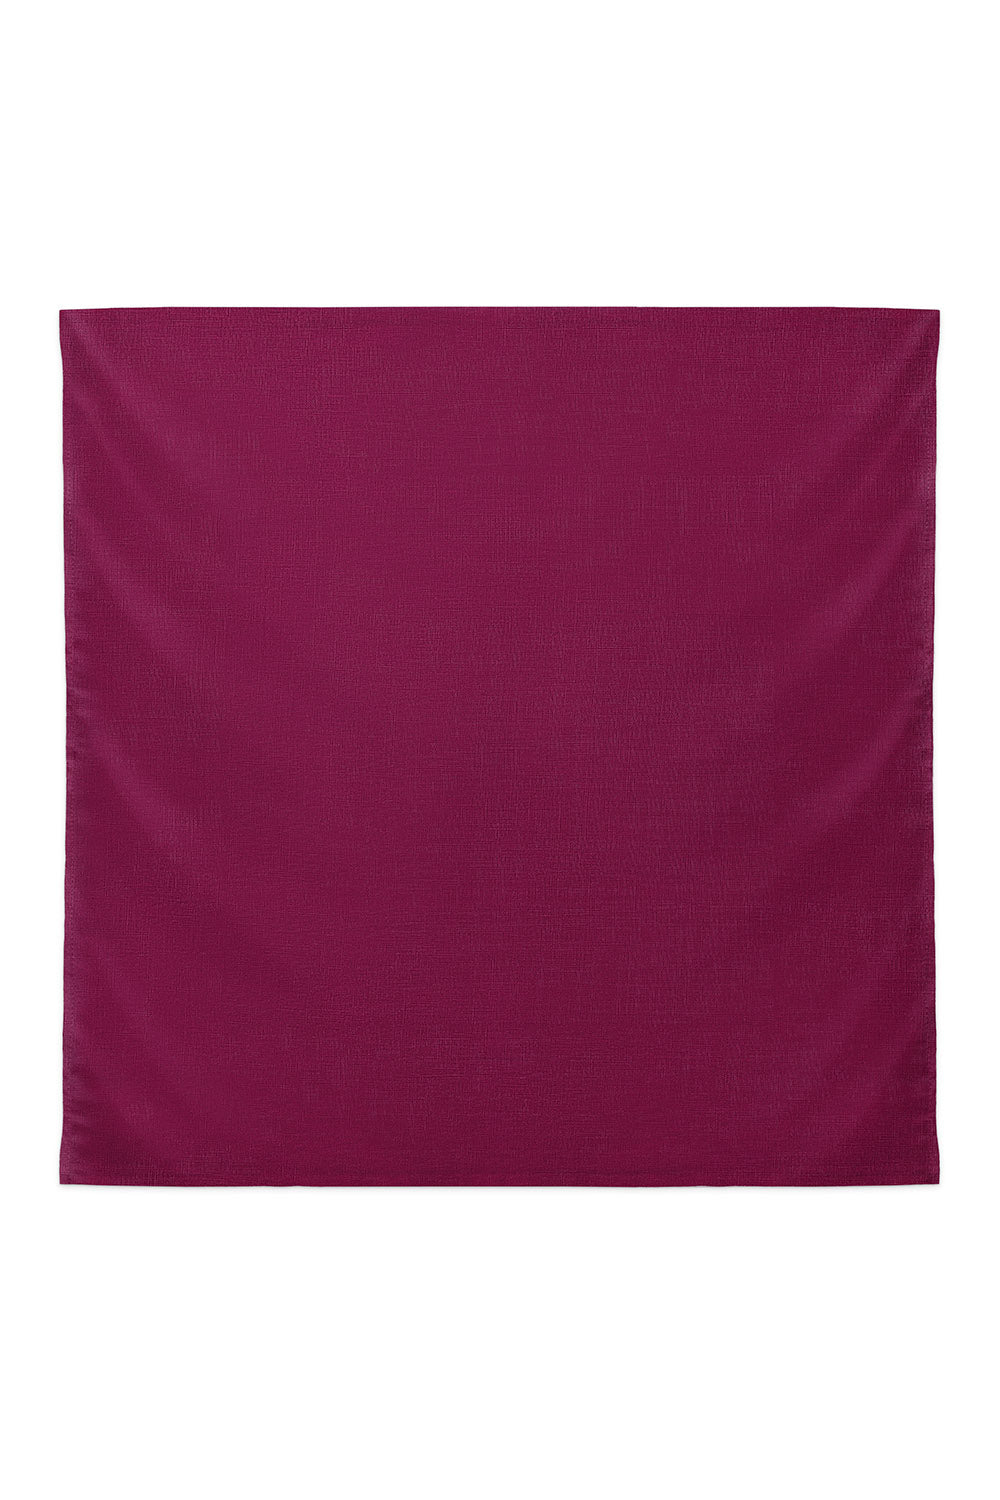 RR Basic Cotton Scarf in Ruby Red